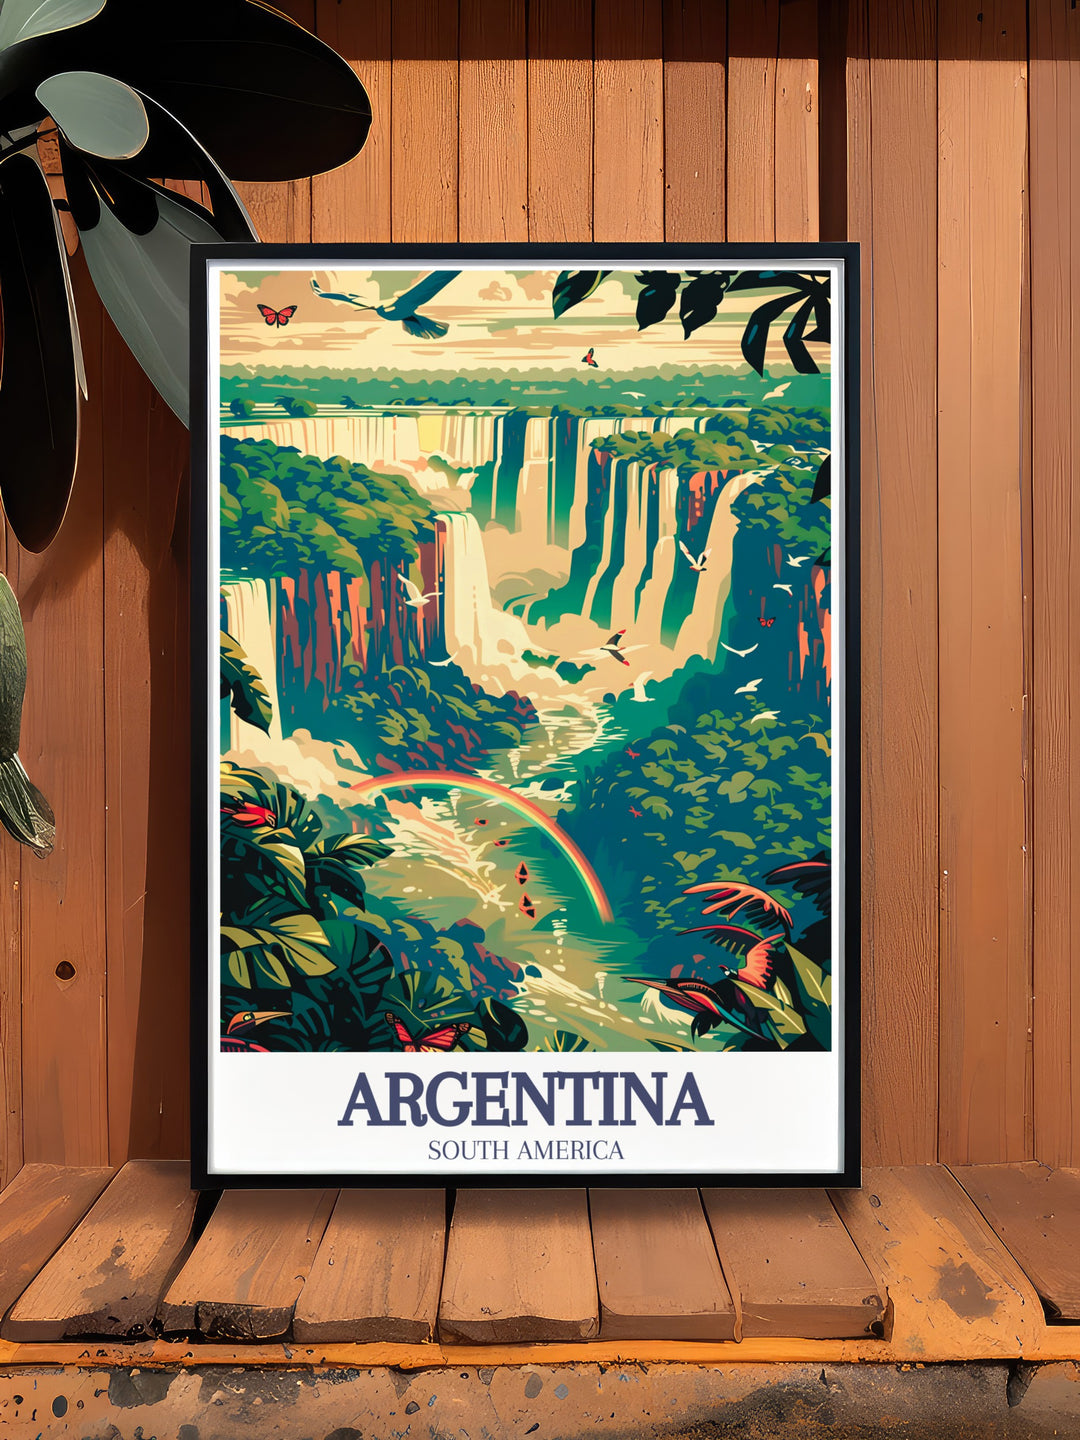 Iguazu Falls, Iguazu River wall art depicting the spectacular natural wonder in all its glory. Perfect for enhancing your living room or office with Argentina artwork that showcases the countrys natural beauty.